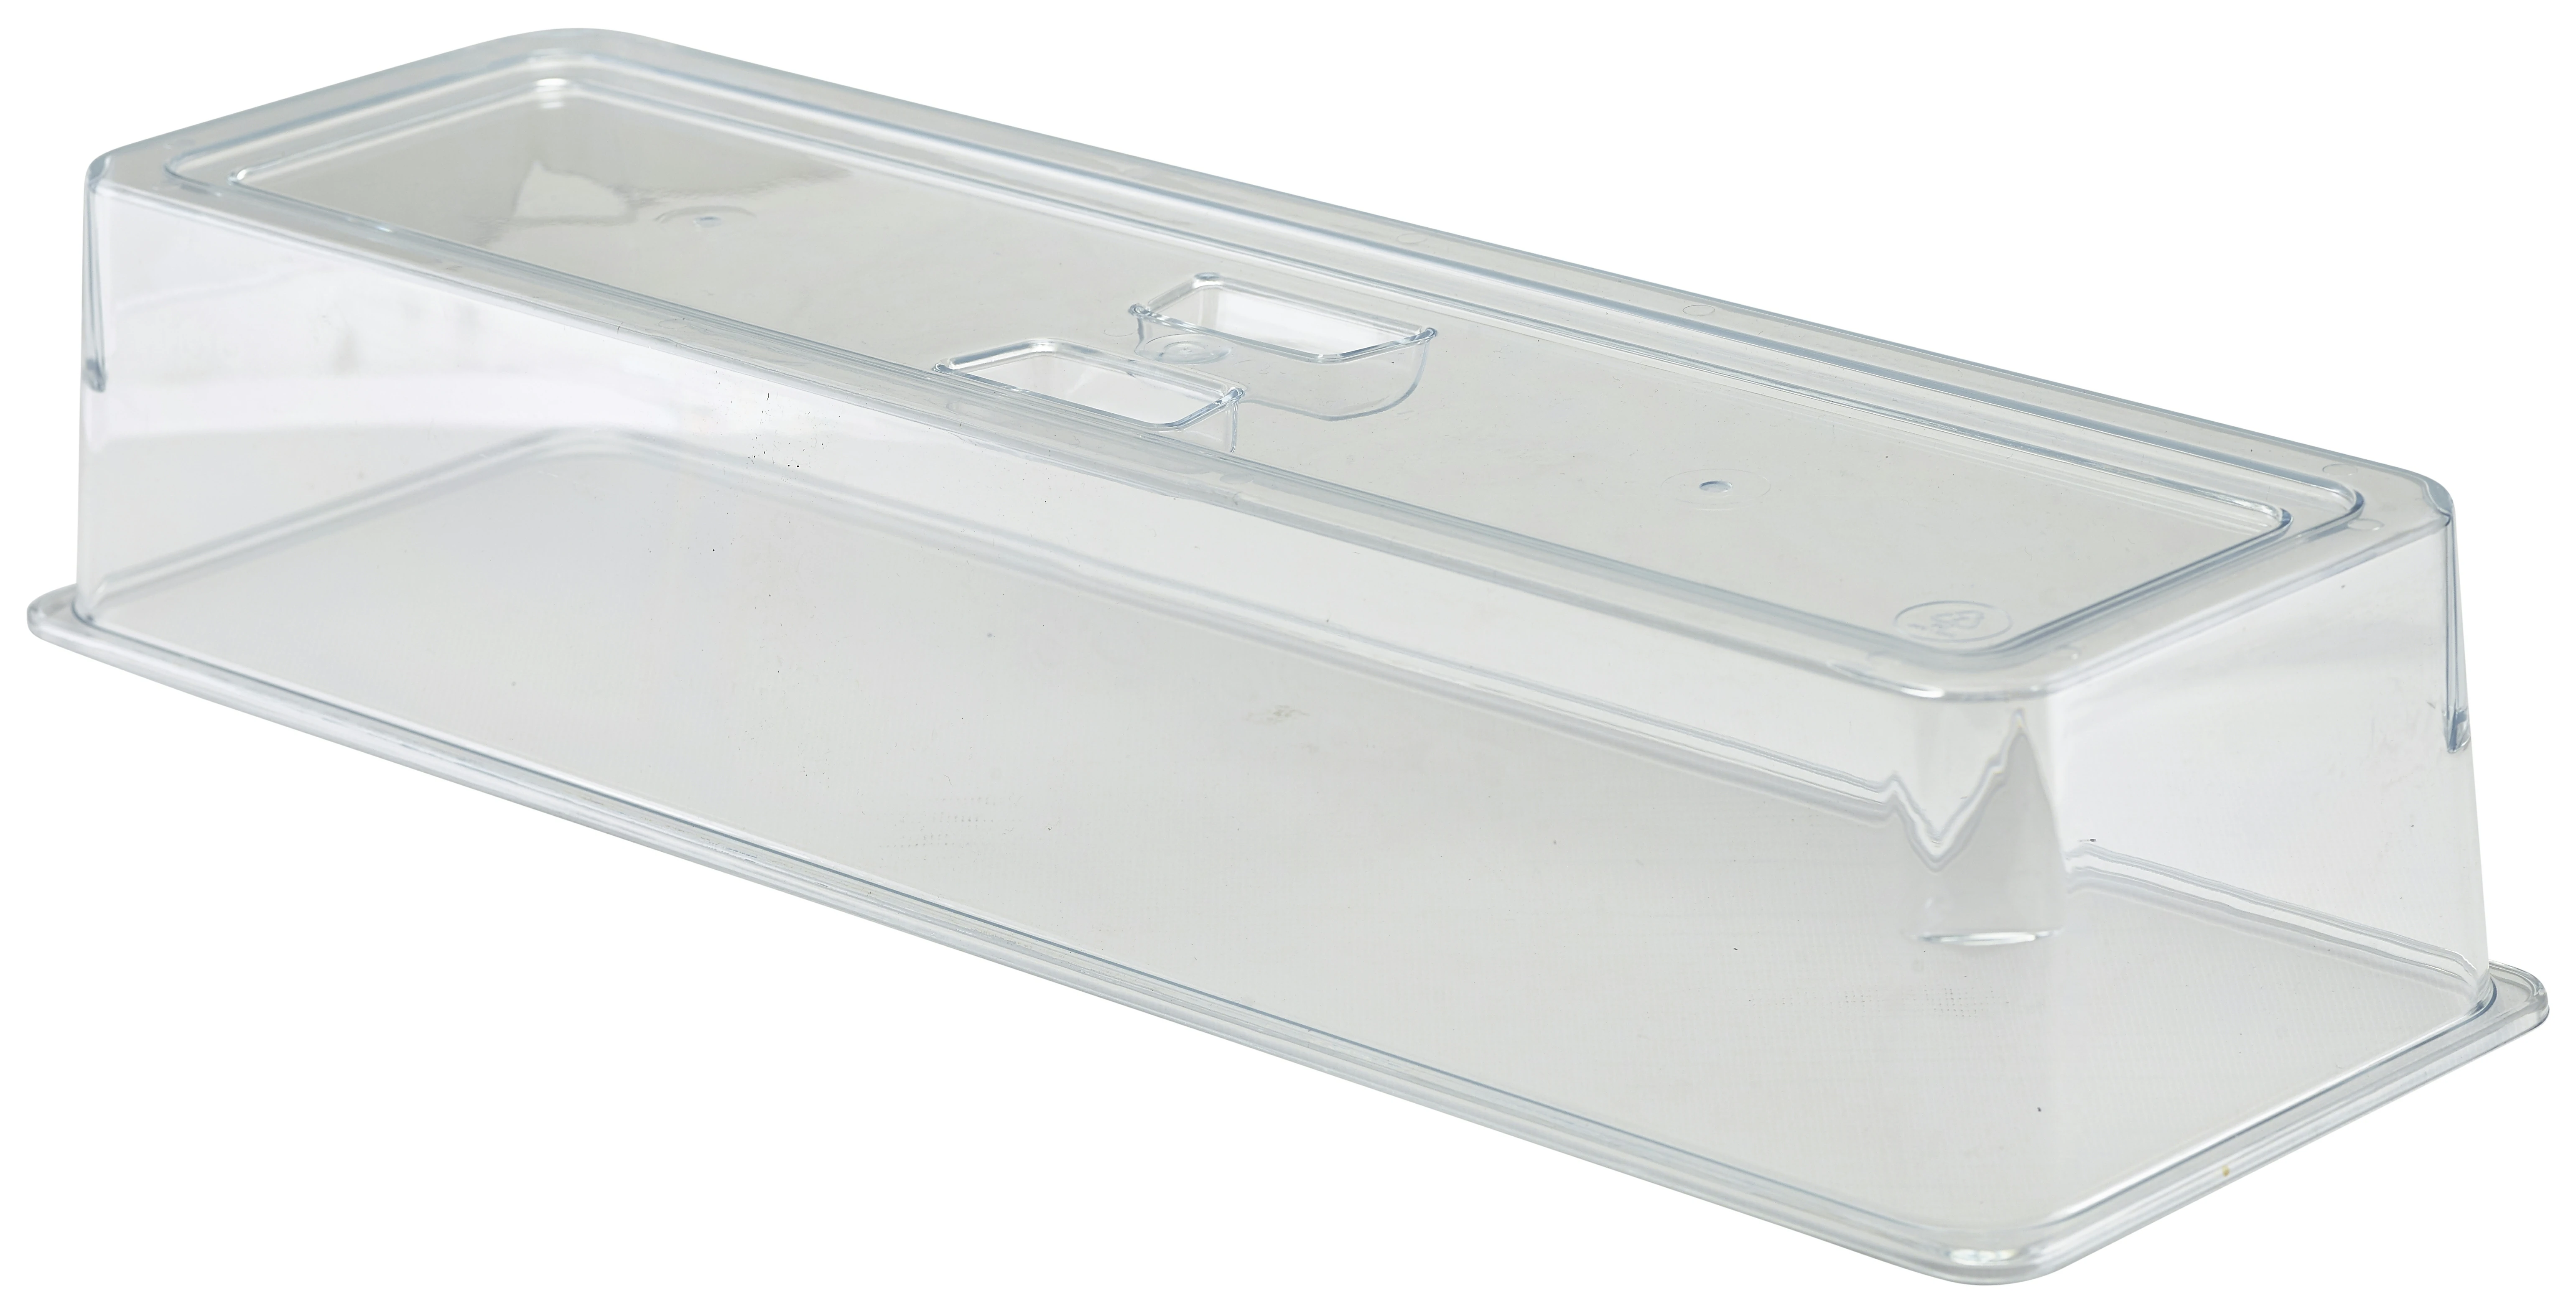 Polycarbonate GN 2/4 Cover